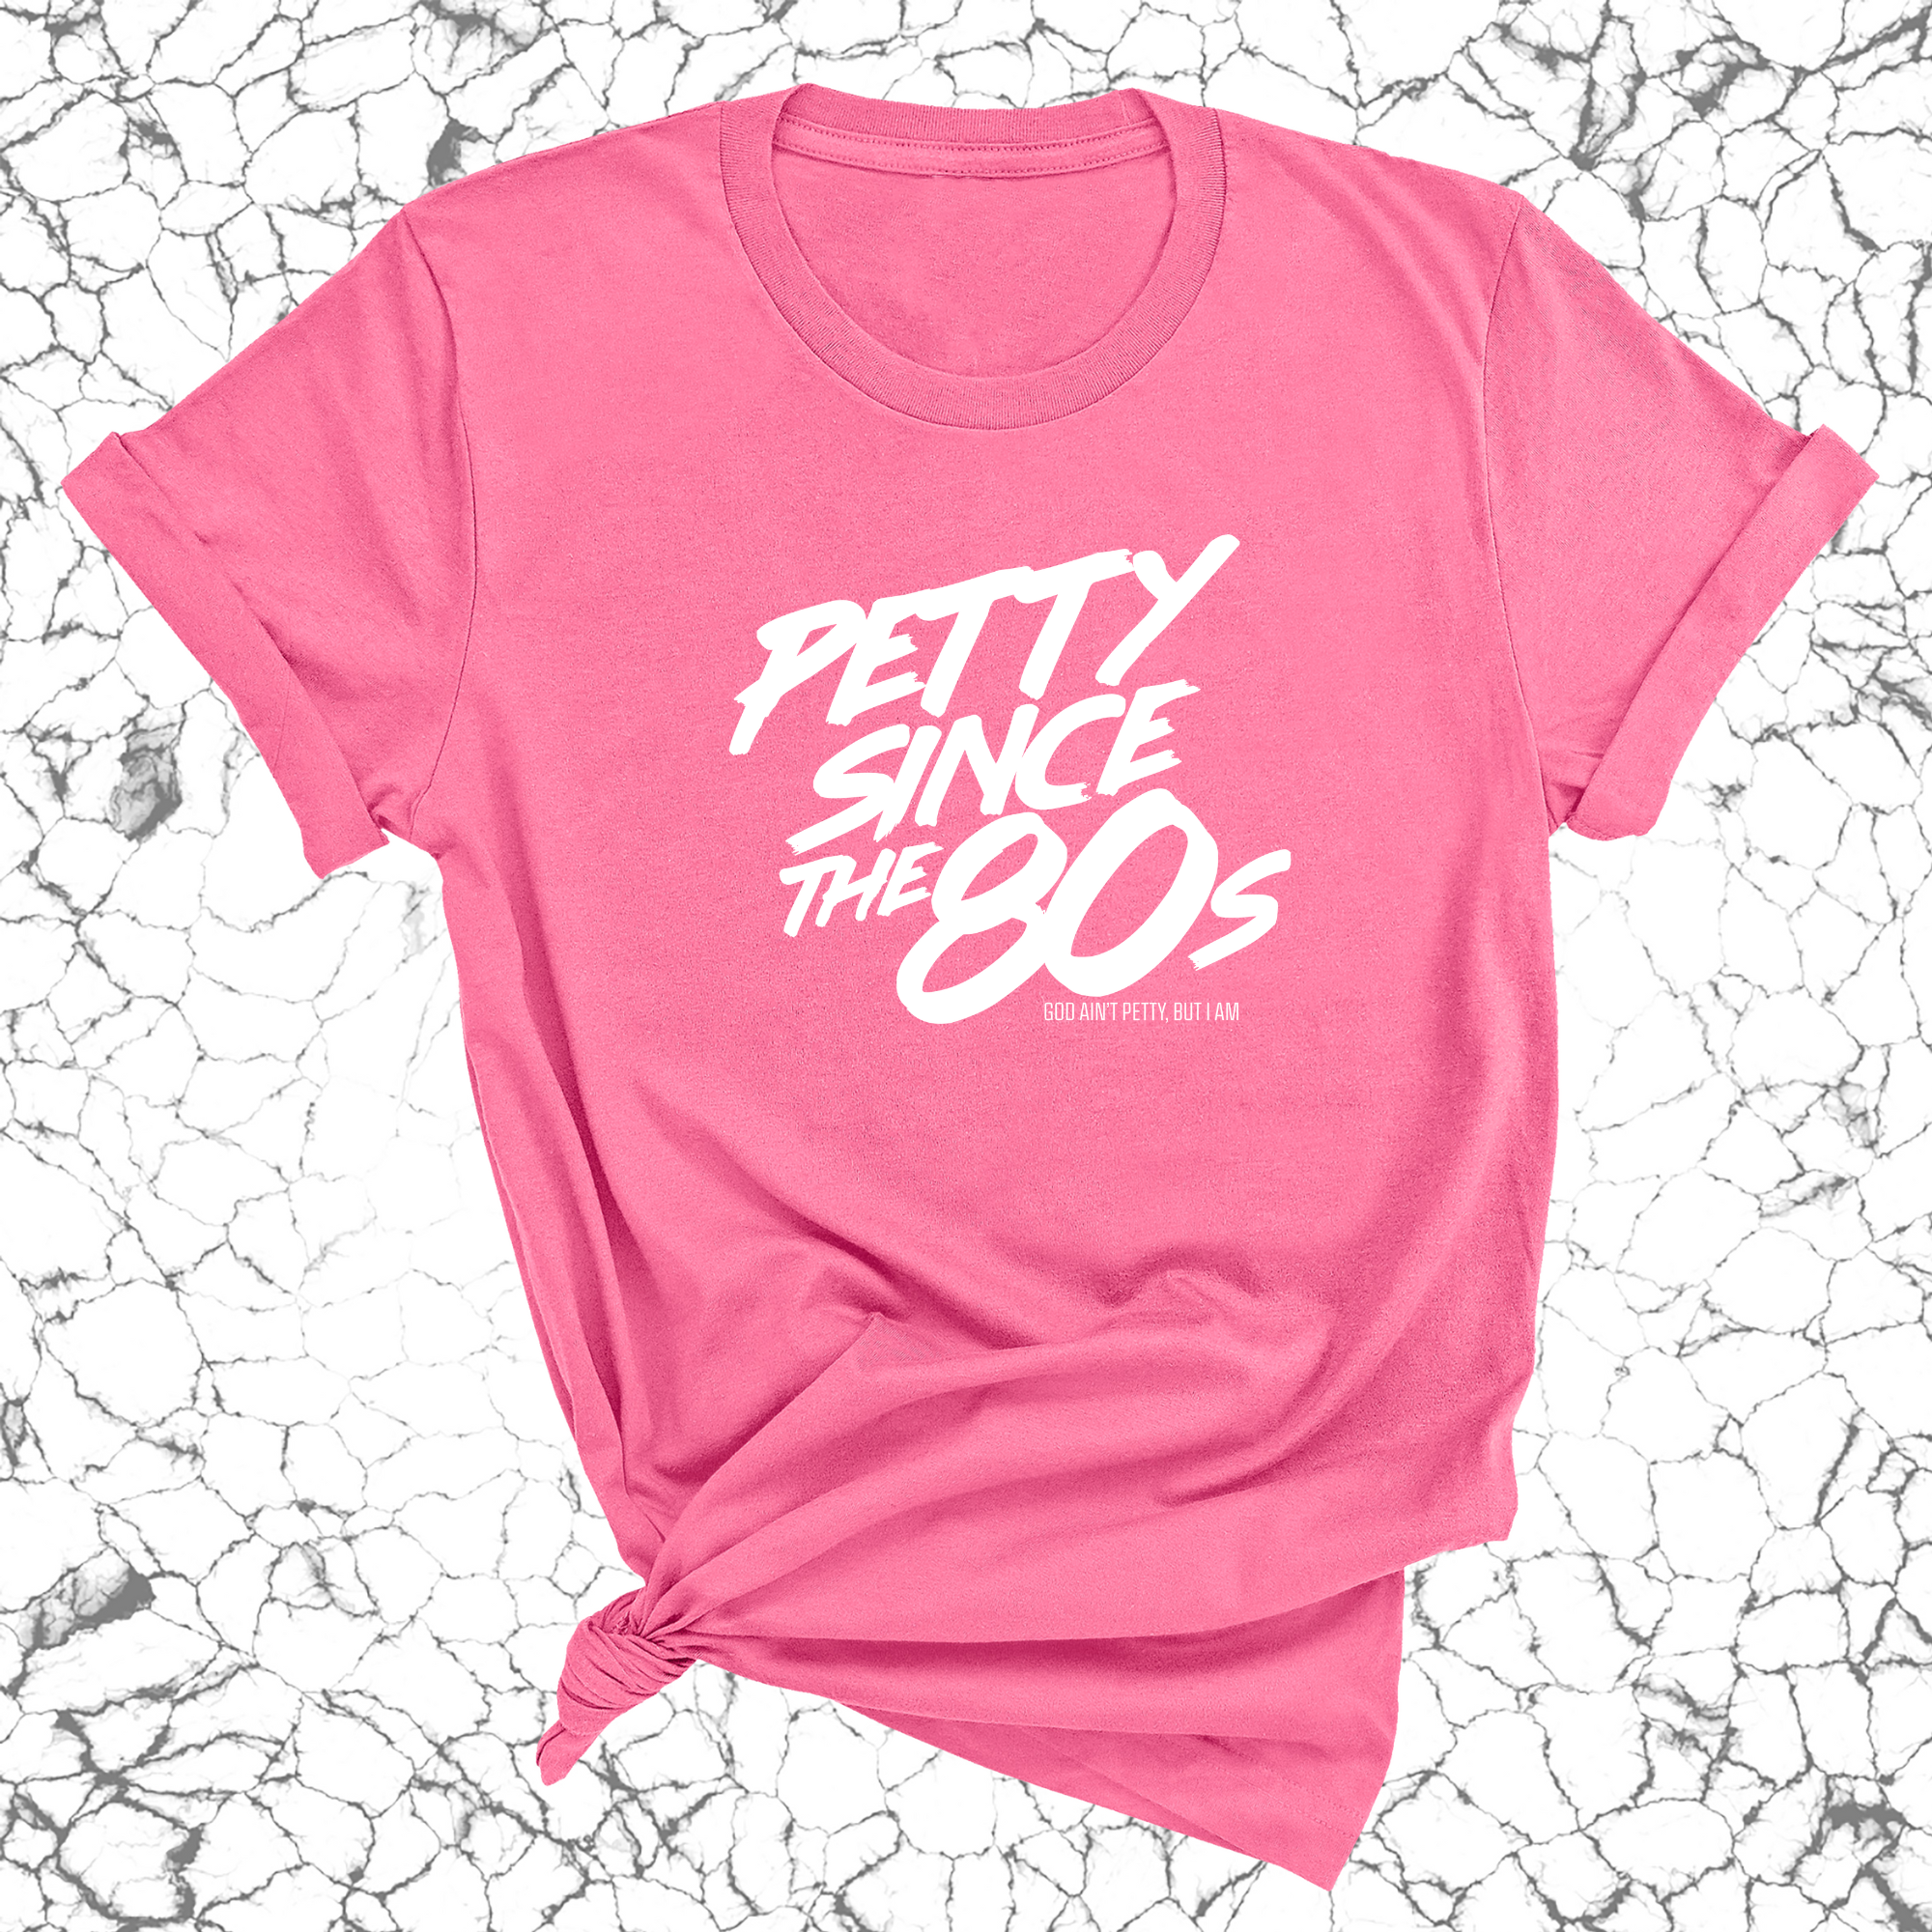 Petty Since the 80s Unisex Tee-T-Shirt-The Original God Ain't Petty But I Am